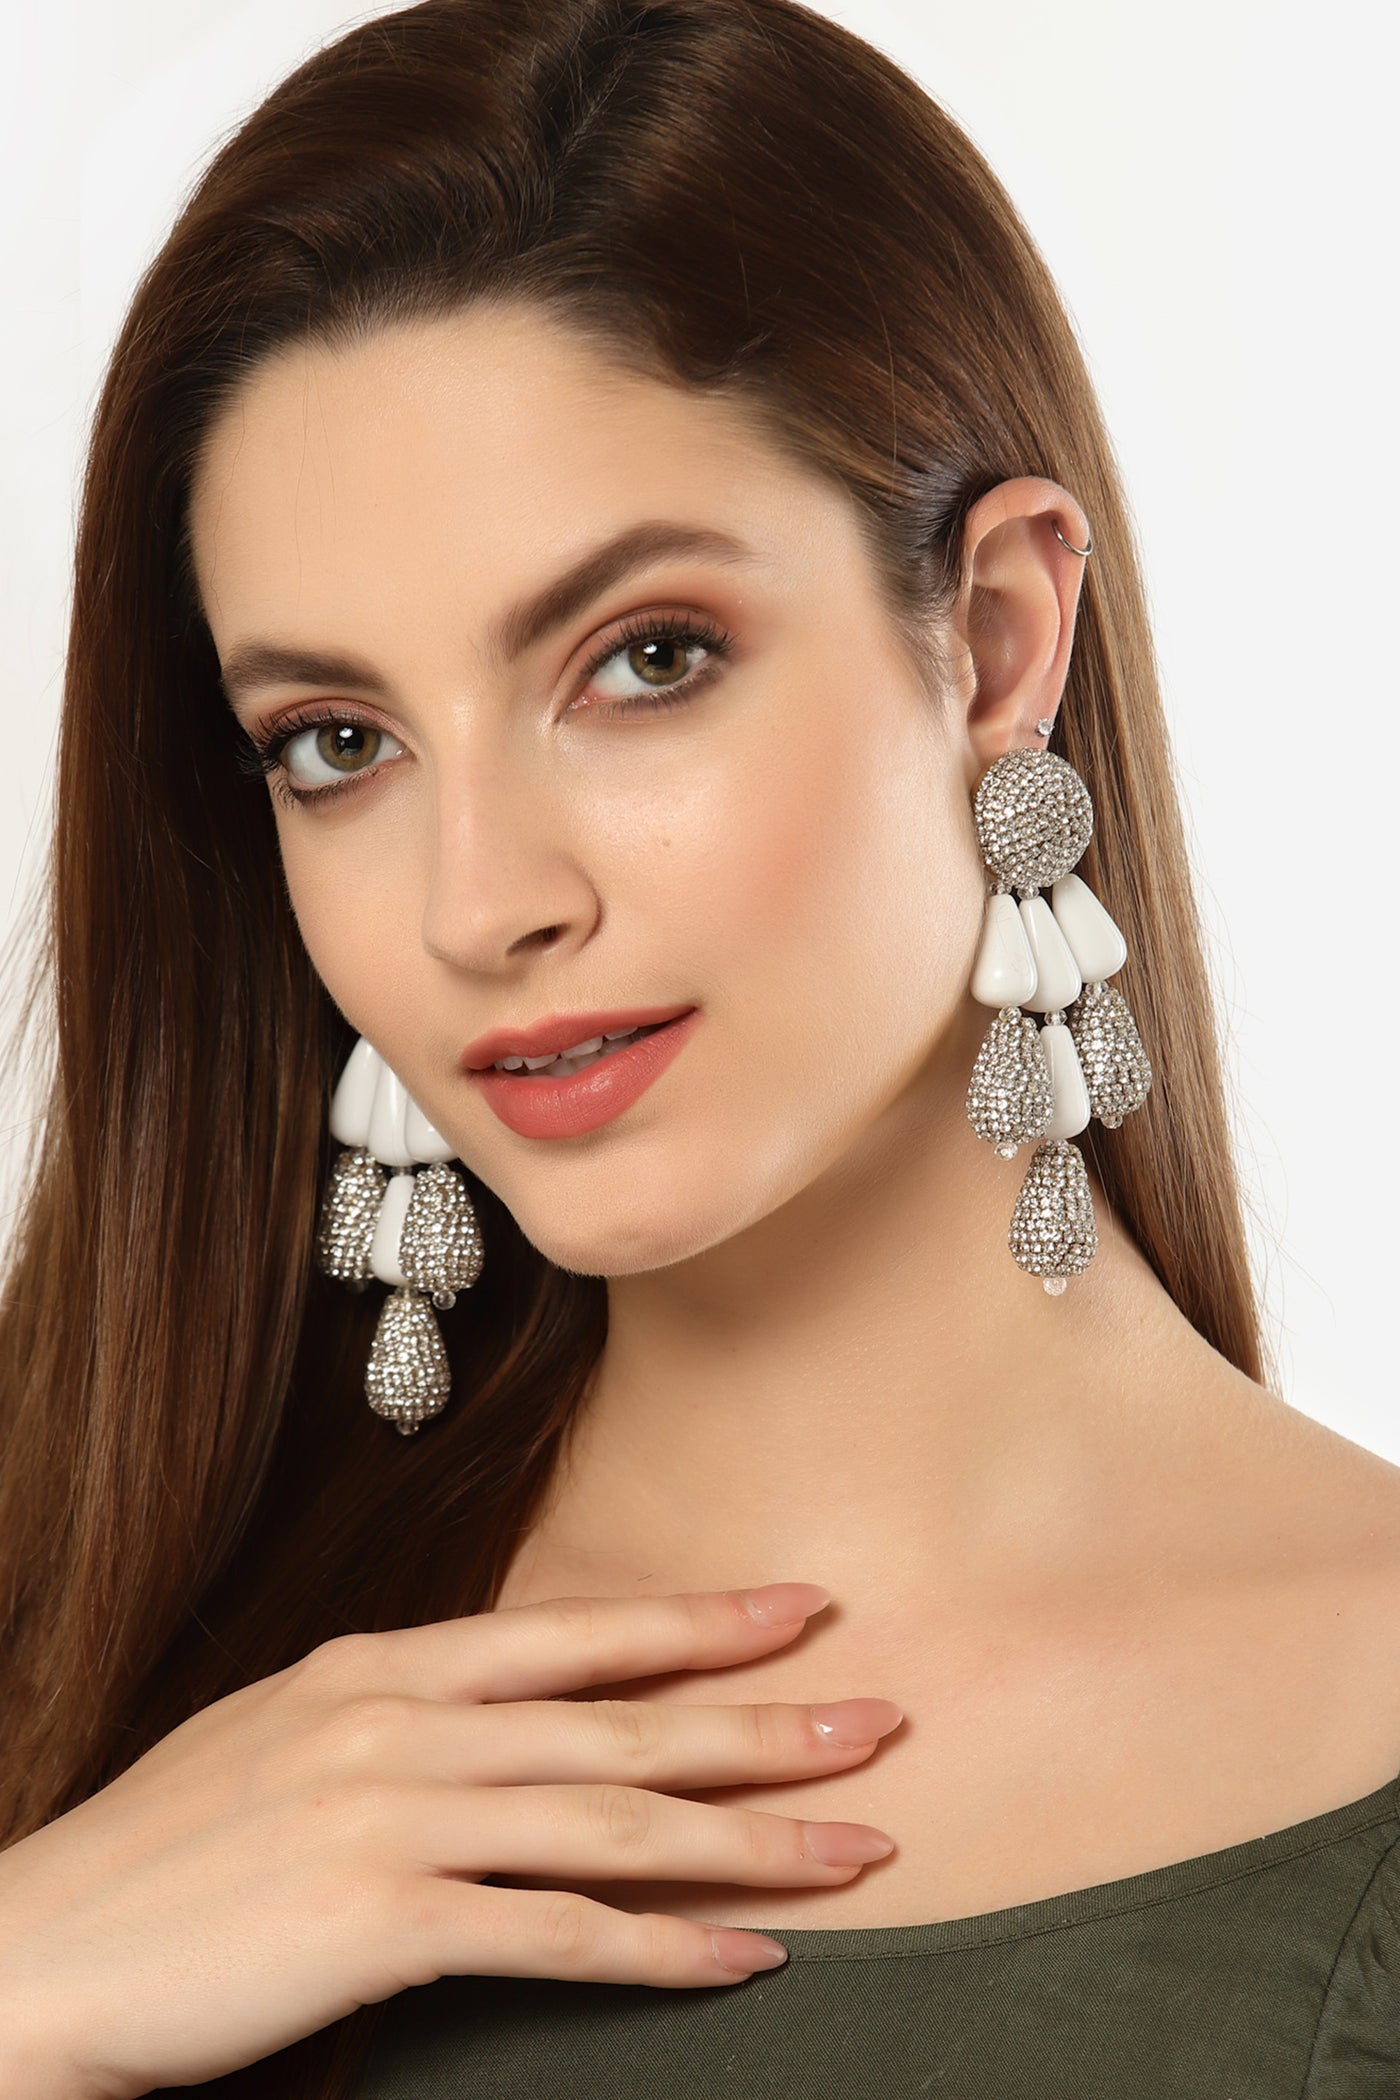 Bijoux by priya chandna Resin And Crystal Drop Earring In White fashion imitation jewellery  indian designer wear online shopping melange singapore